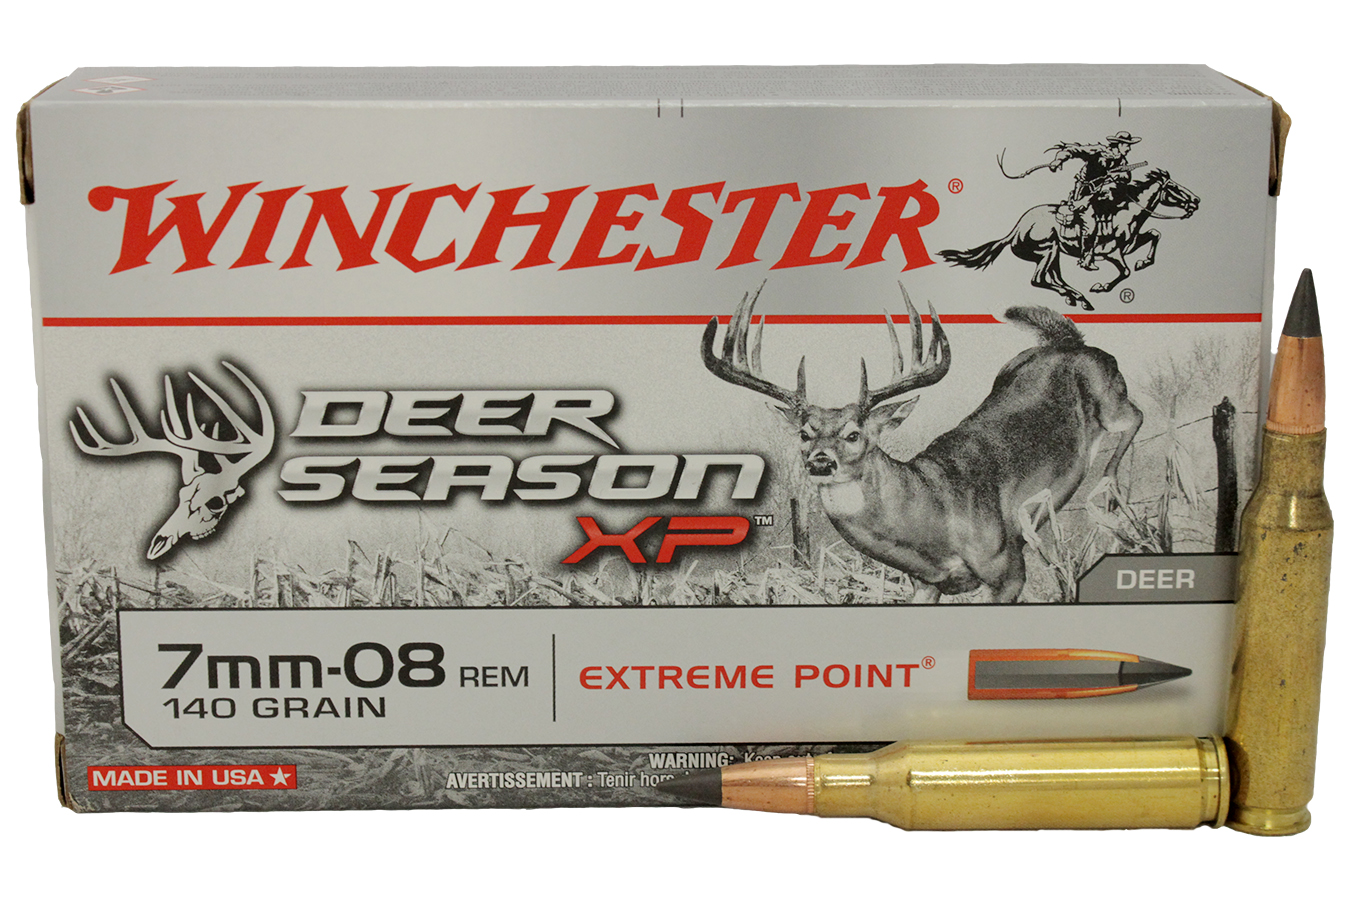 winchester-7mm-08-rem-140-gr-extreme-point-poly-tip-deer-season-xp-20